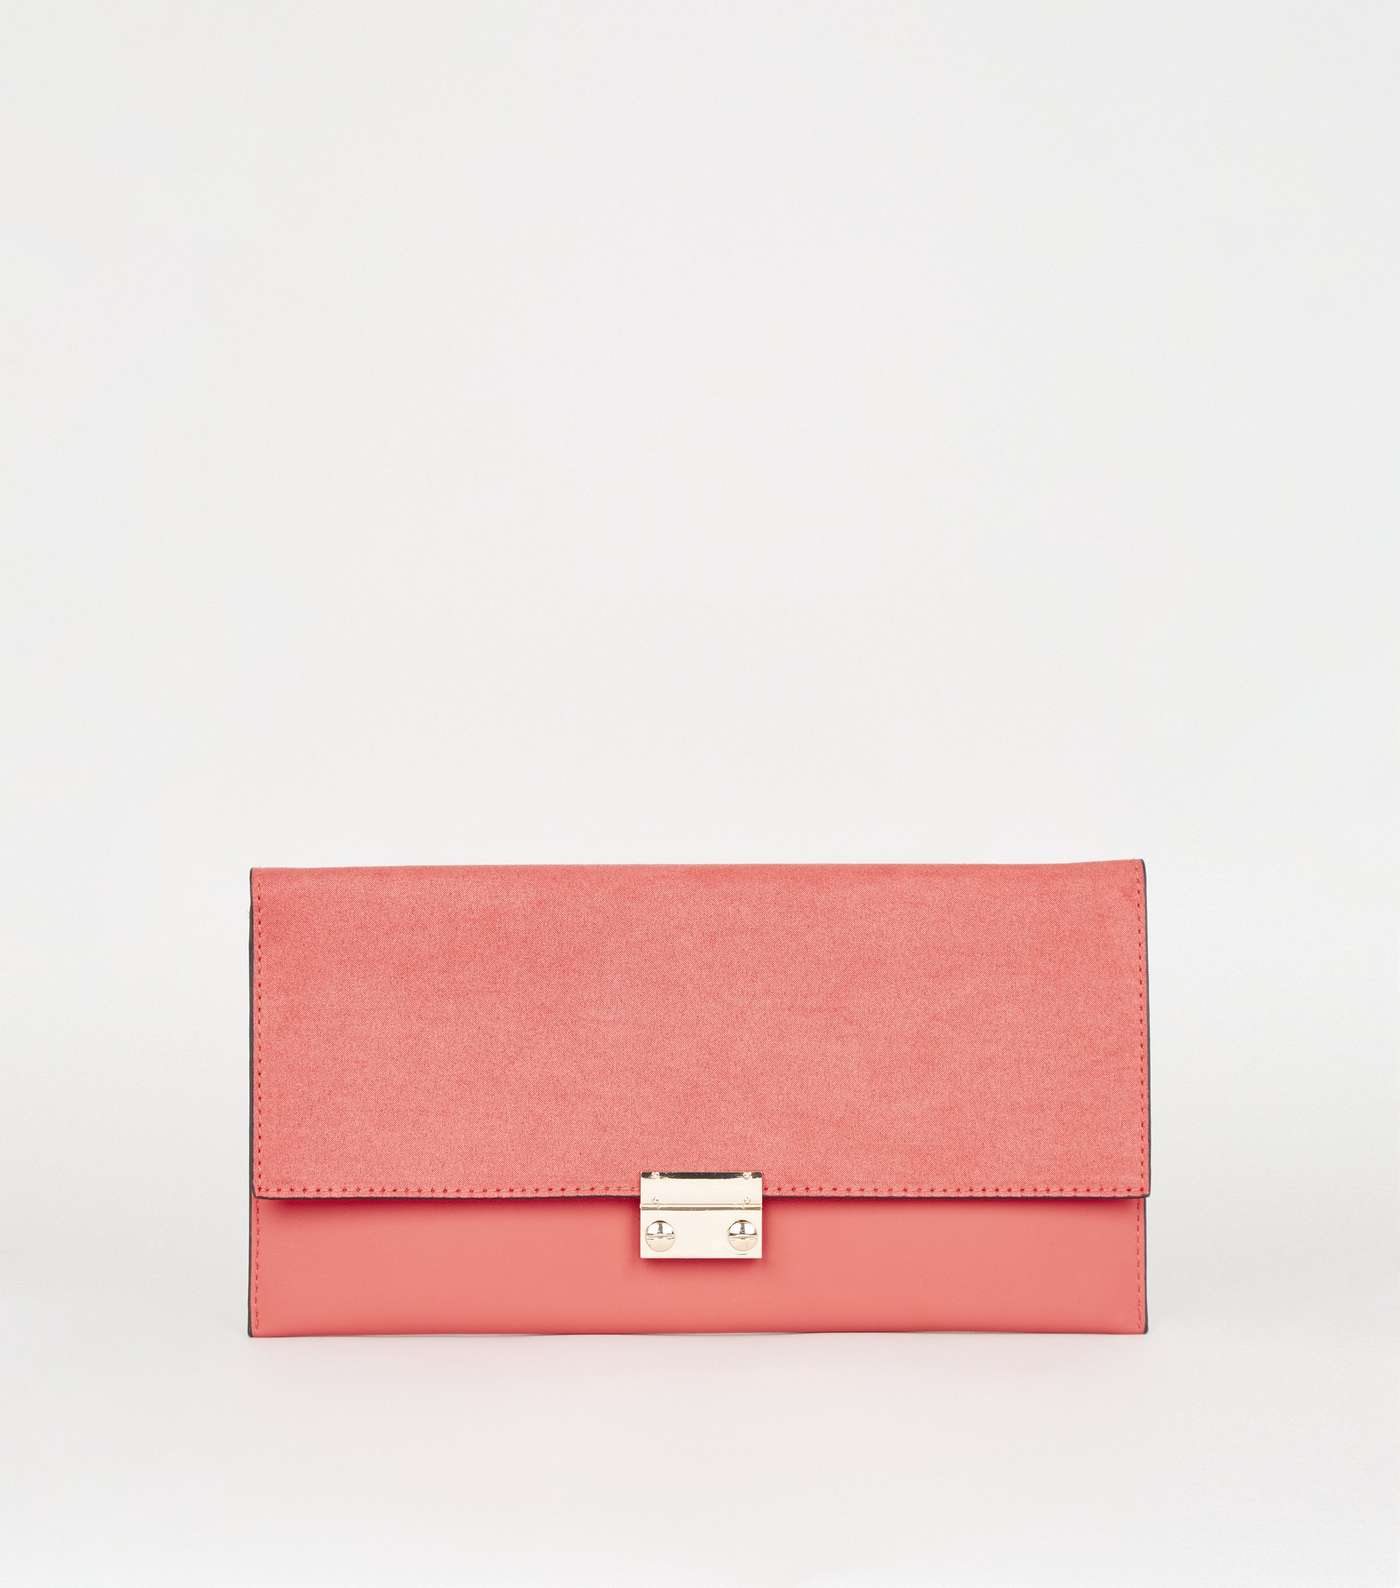 Coral Leather-Look Suedette Clutch Bag